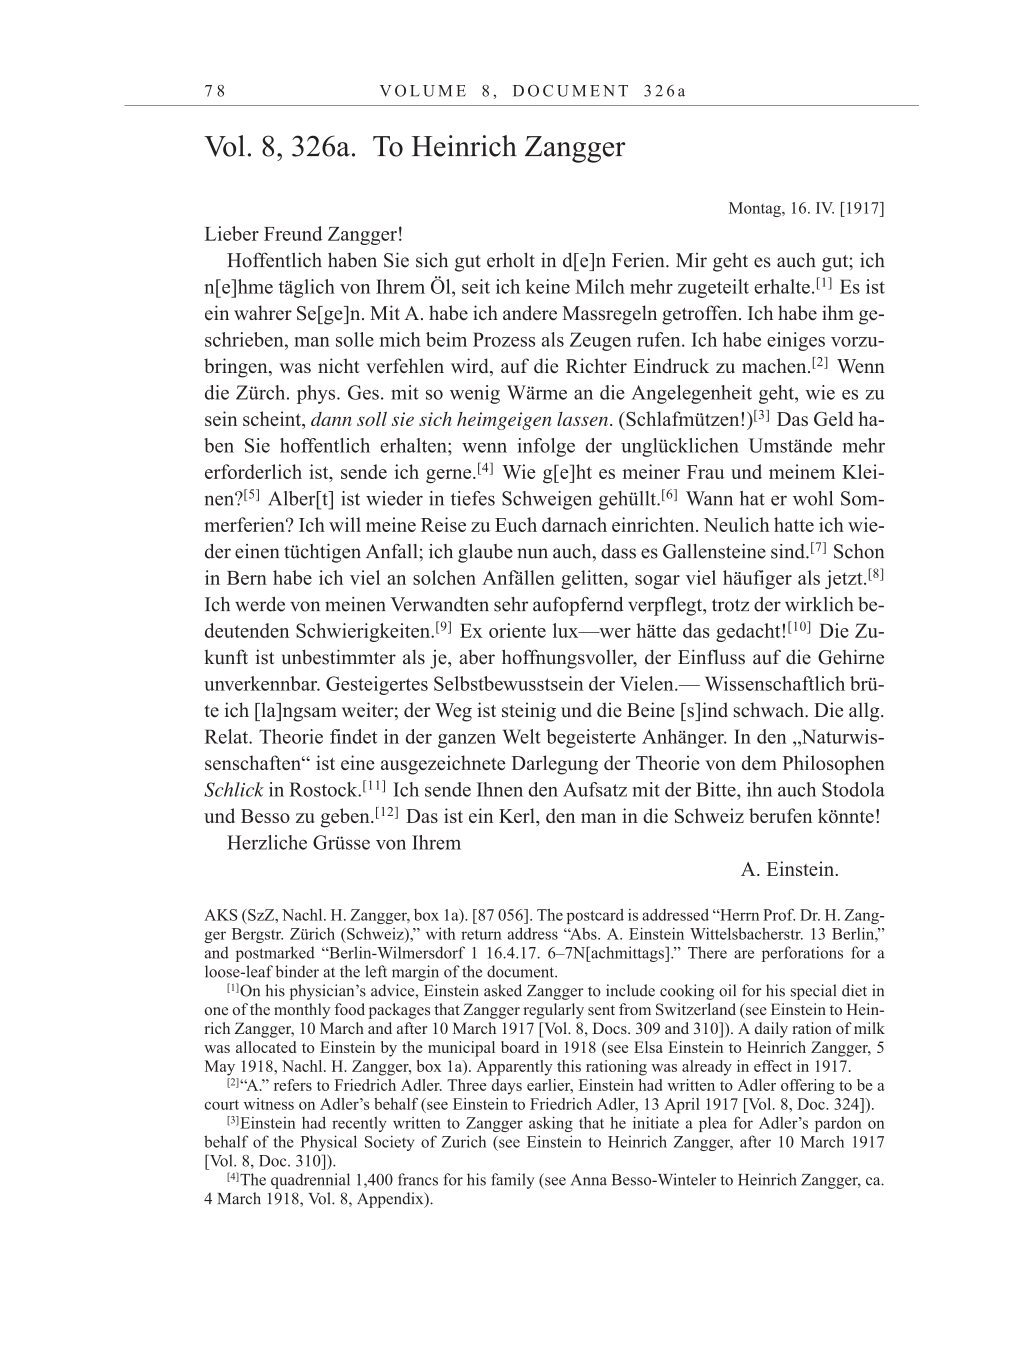 Volume 10: The Berlin Years: Correspondence May-December 1920 / Supplementary Correspondence 1909-1920 page 78